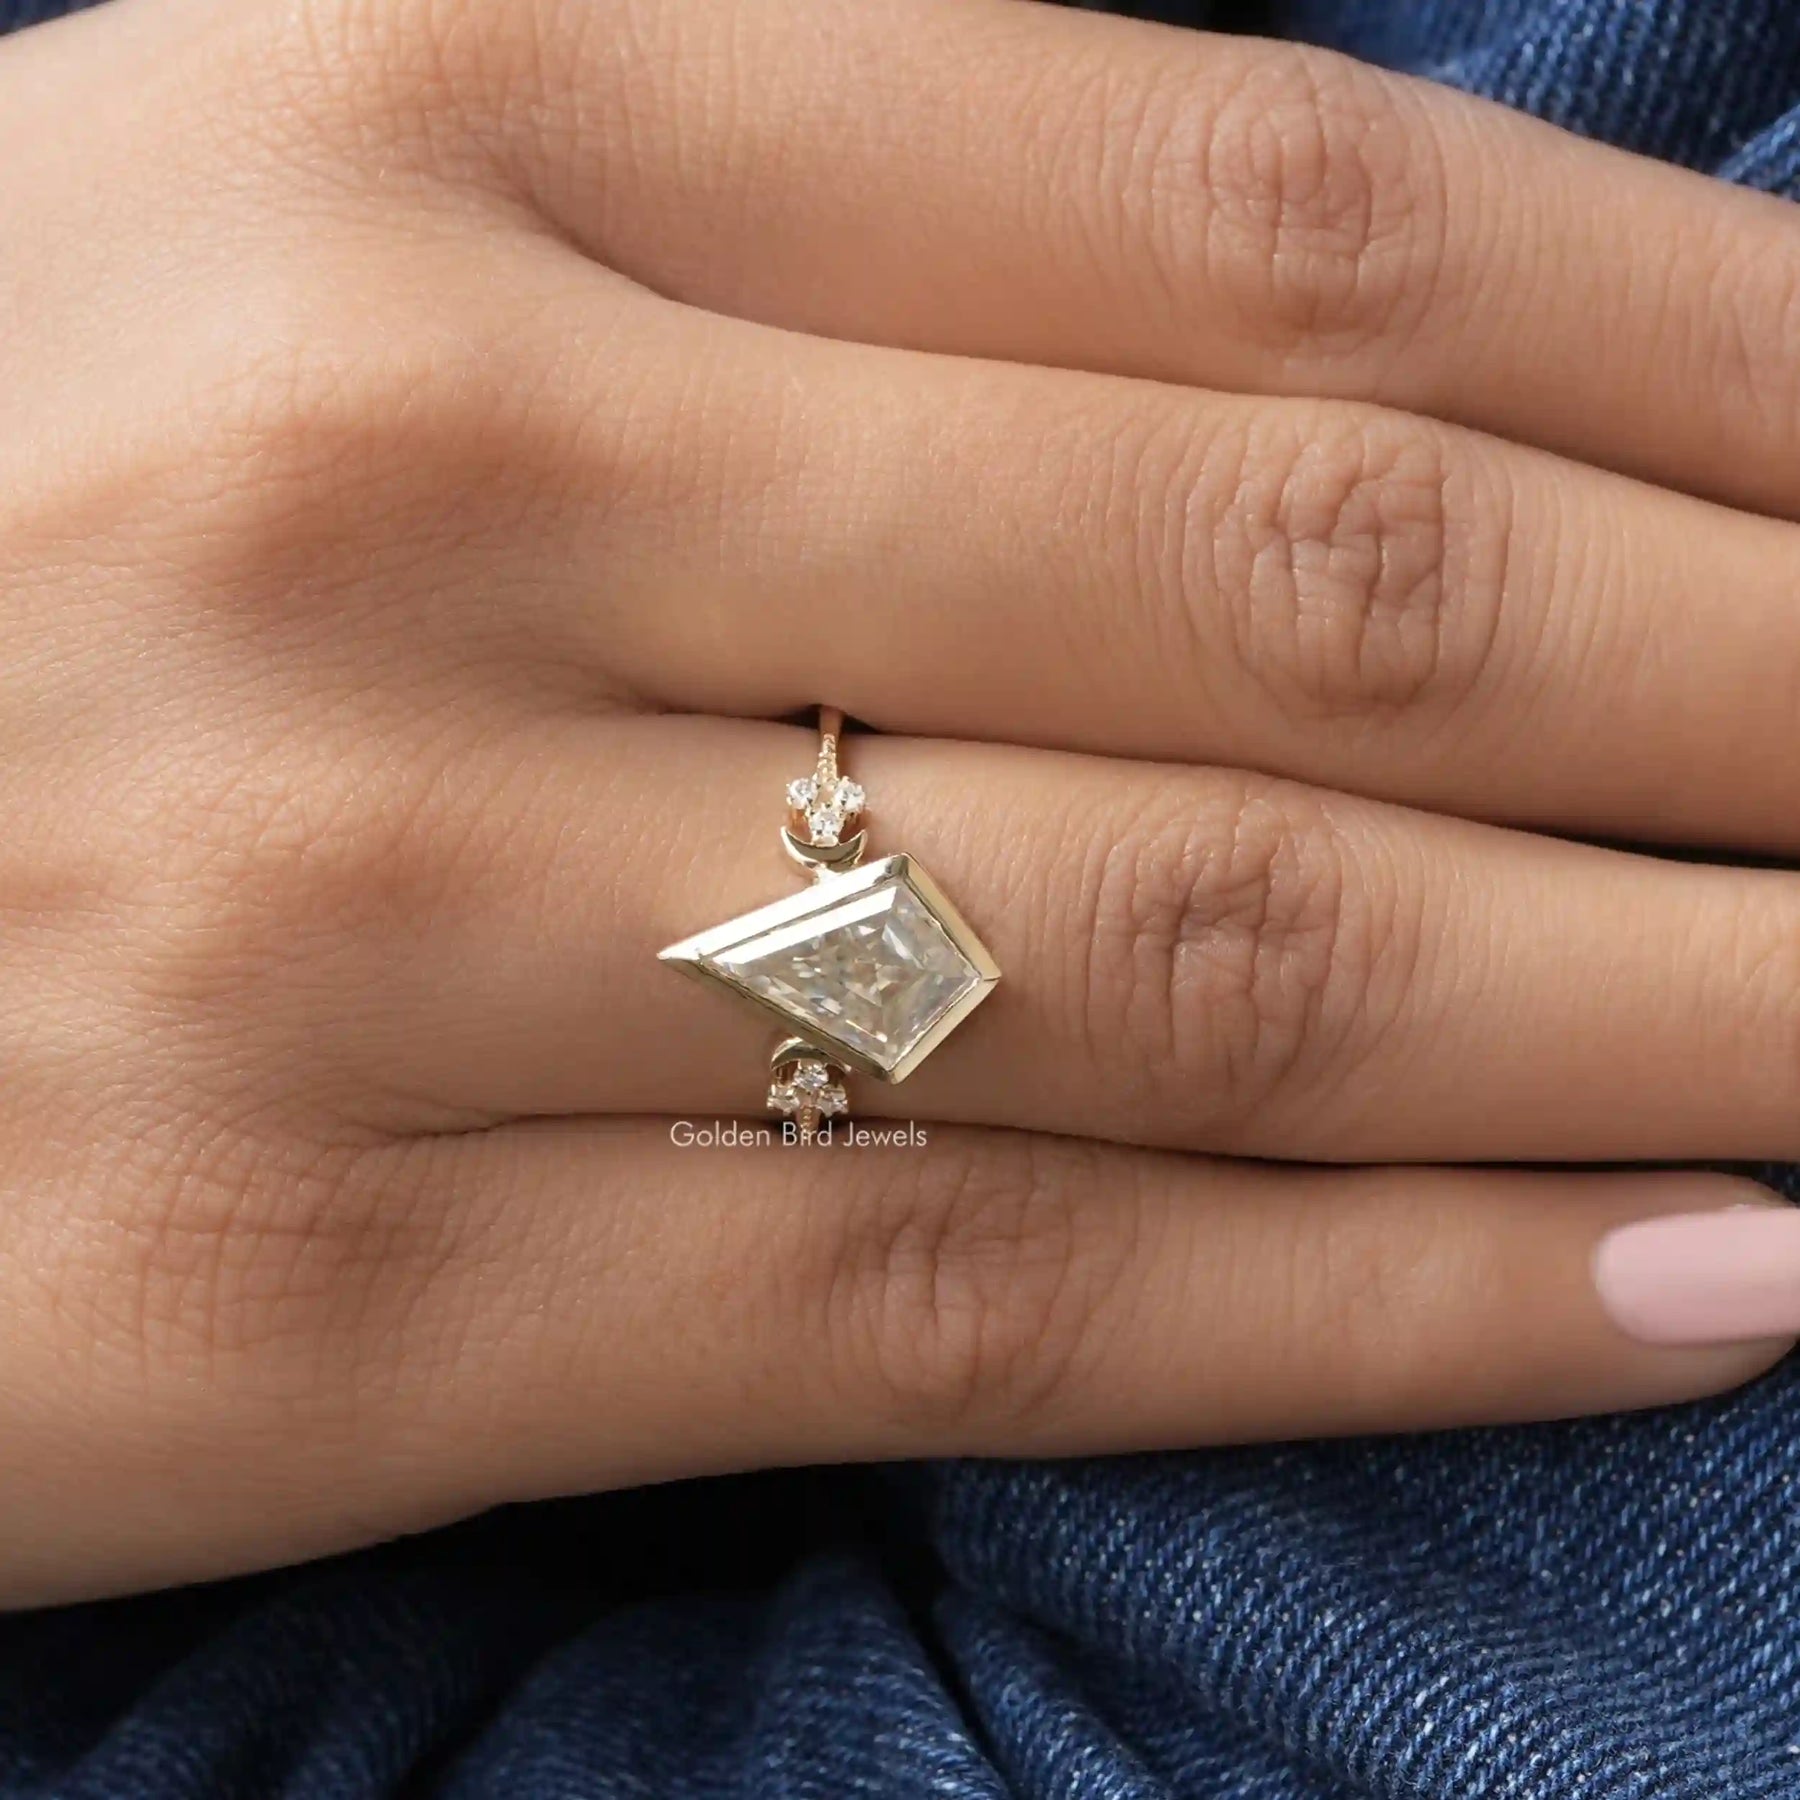 [In finger view of kite cut engagement ring]-[Golden Bird Jewels]